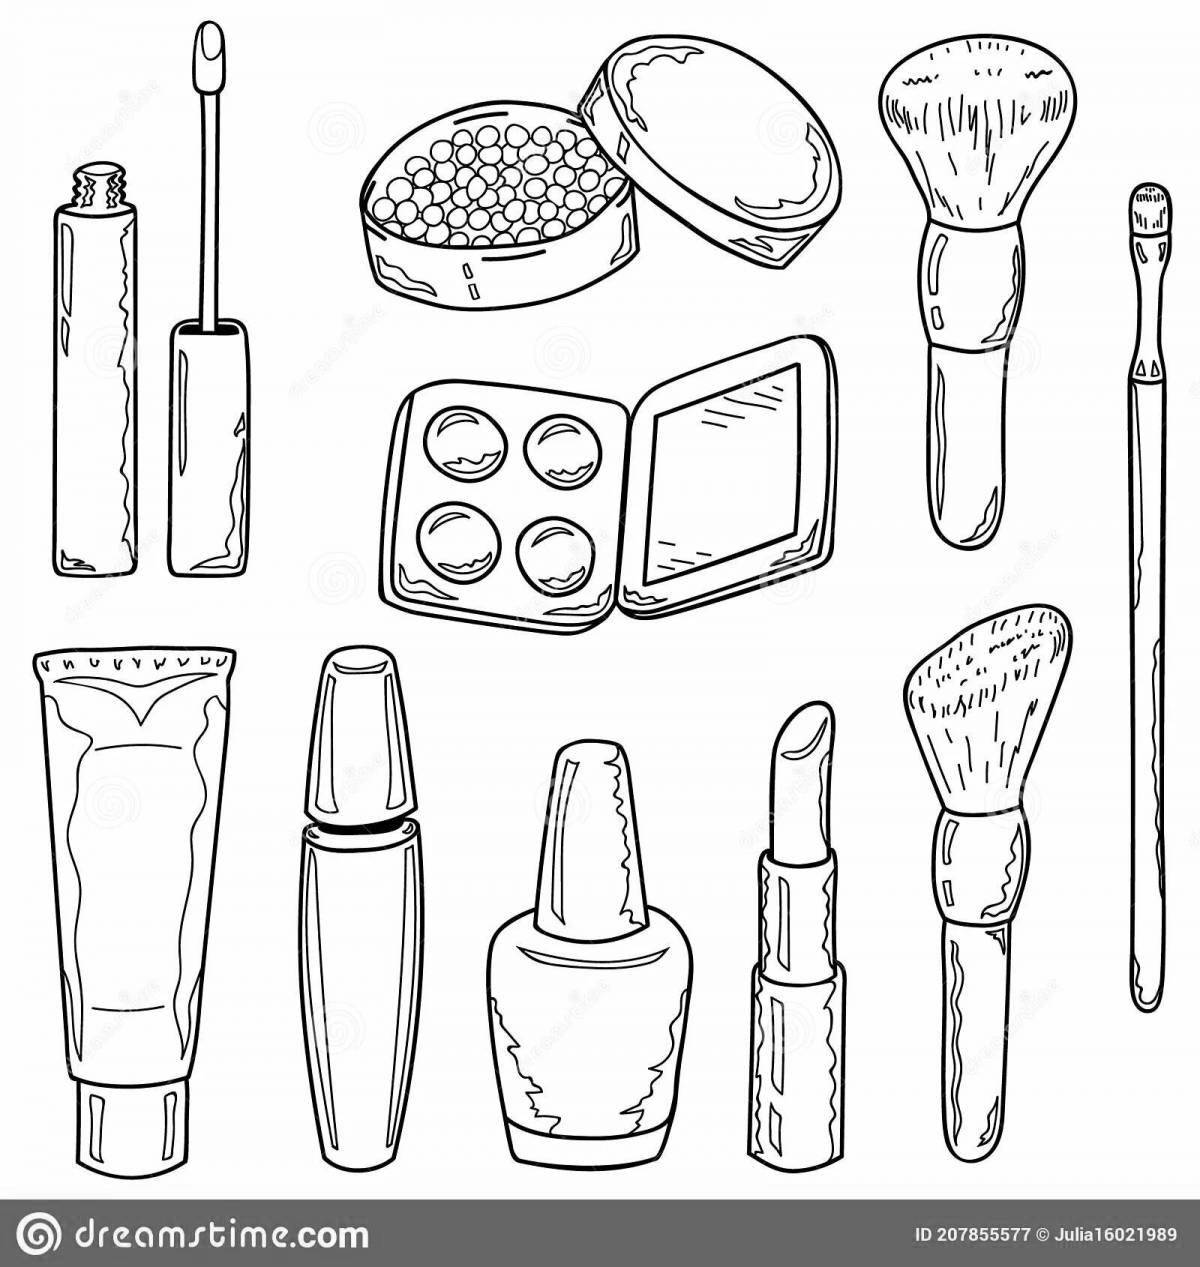 Glitter eyeshadow coloring page